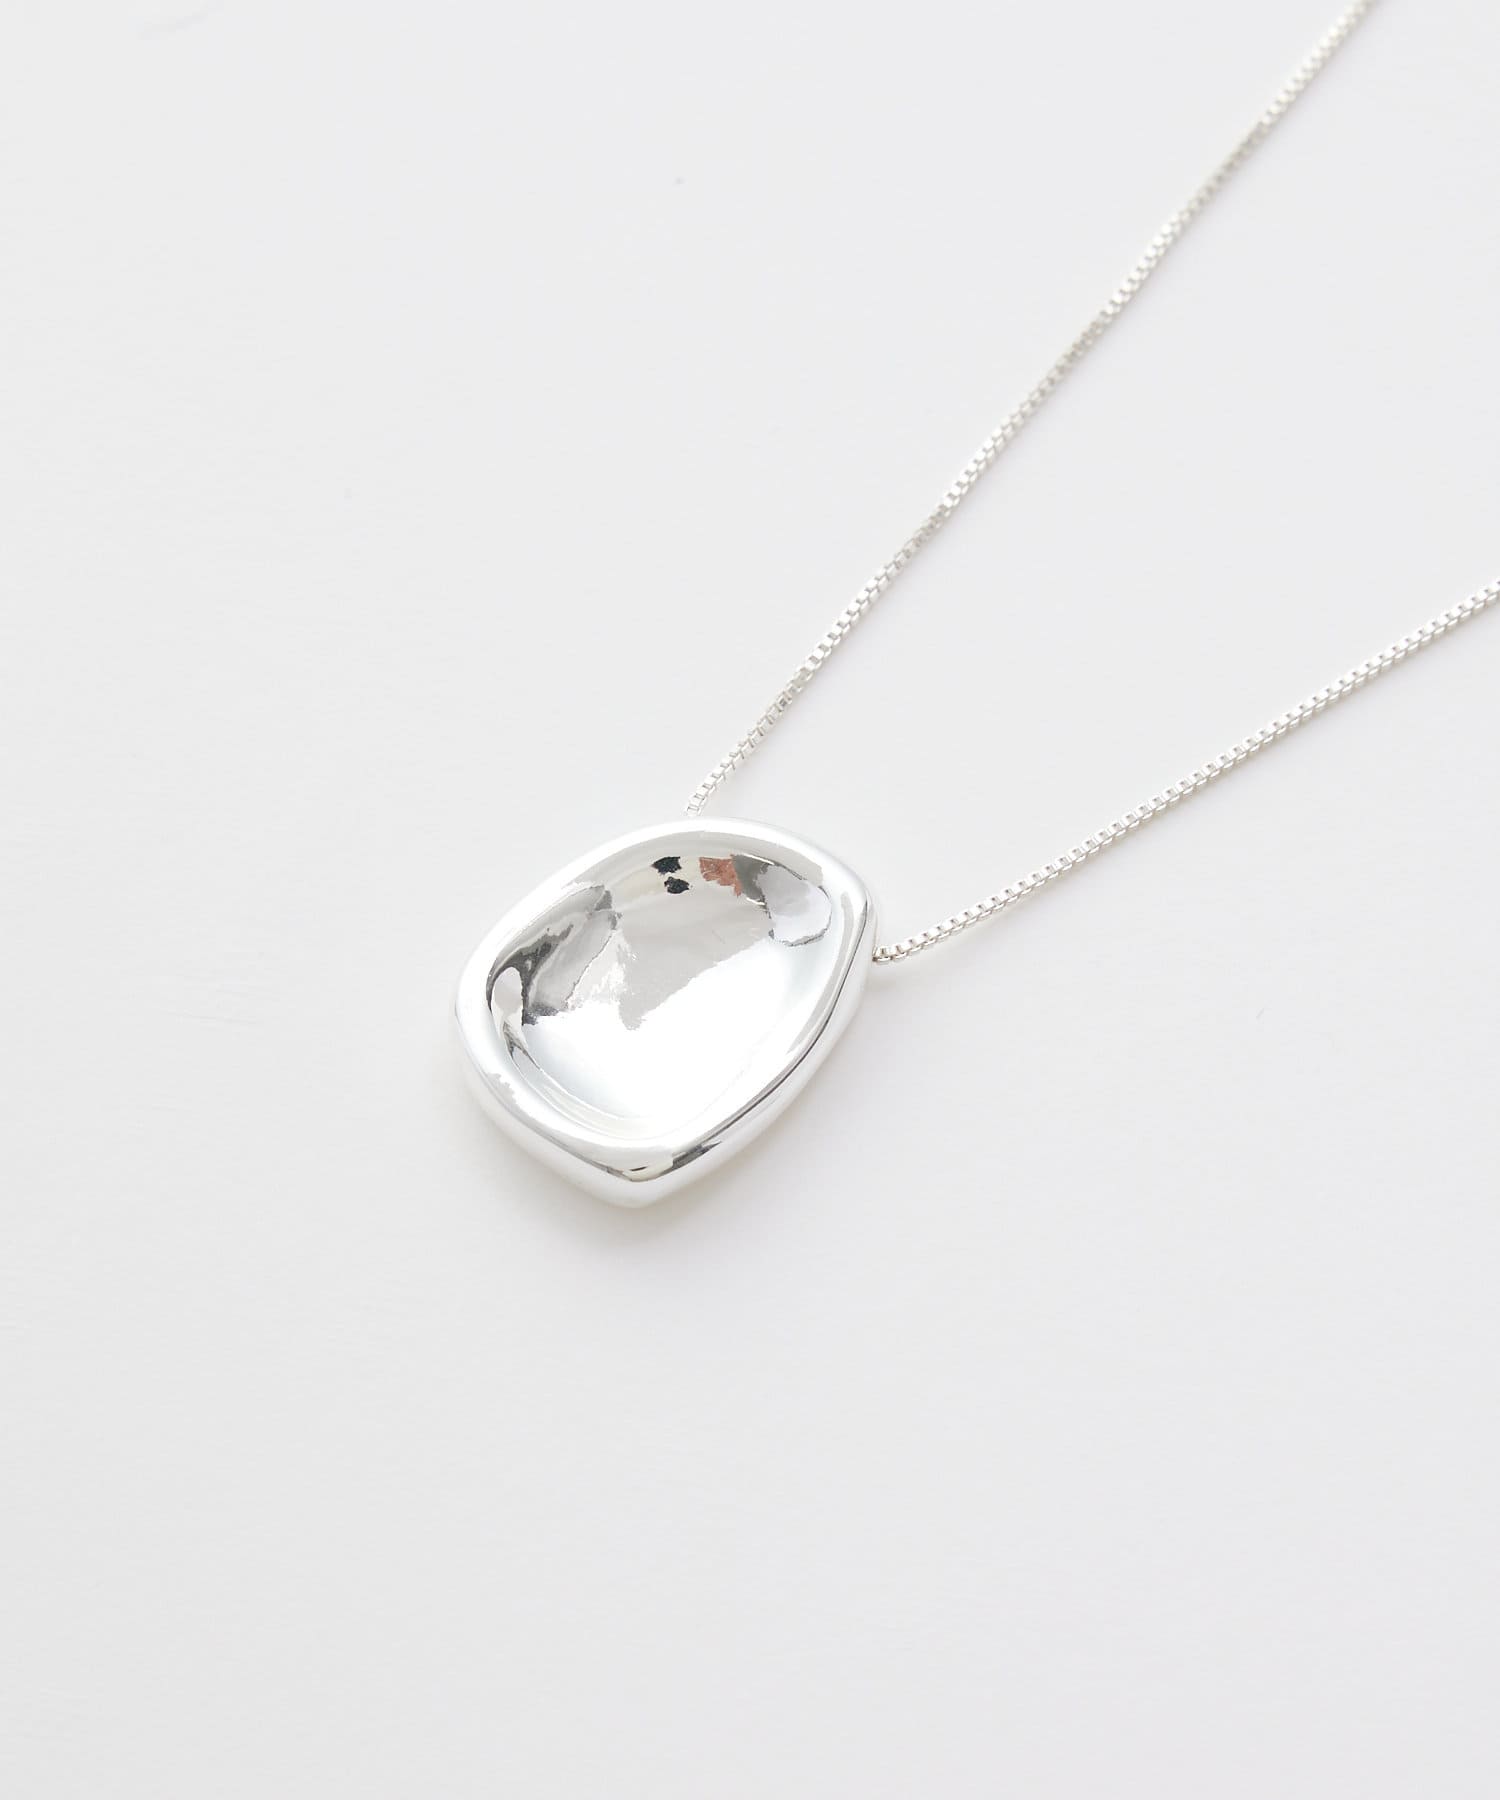 RIVE DROITE(リヴドロワ) 【Nothing And Others】Bumpmotif Necklace